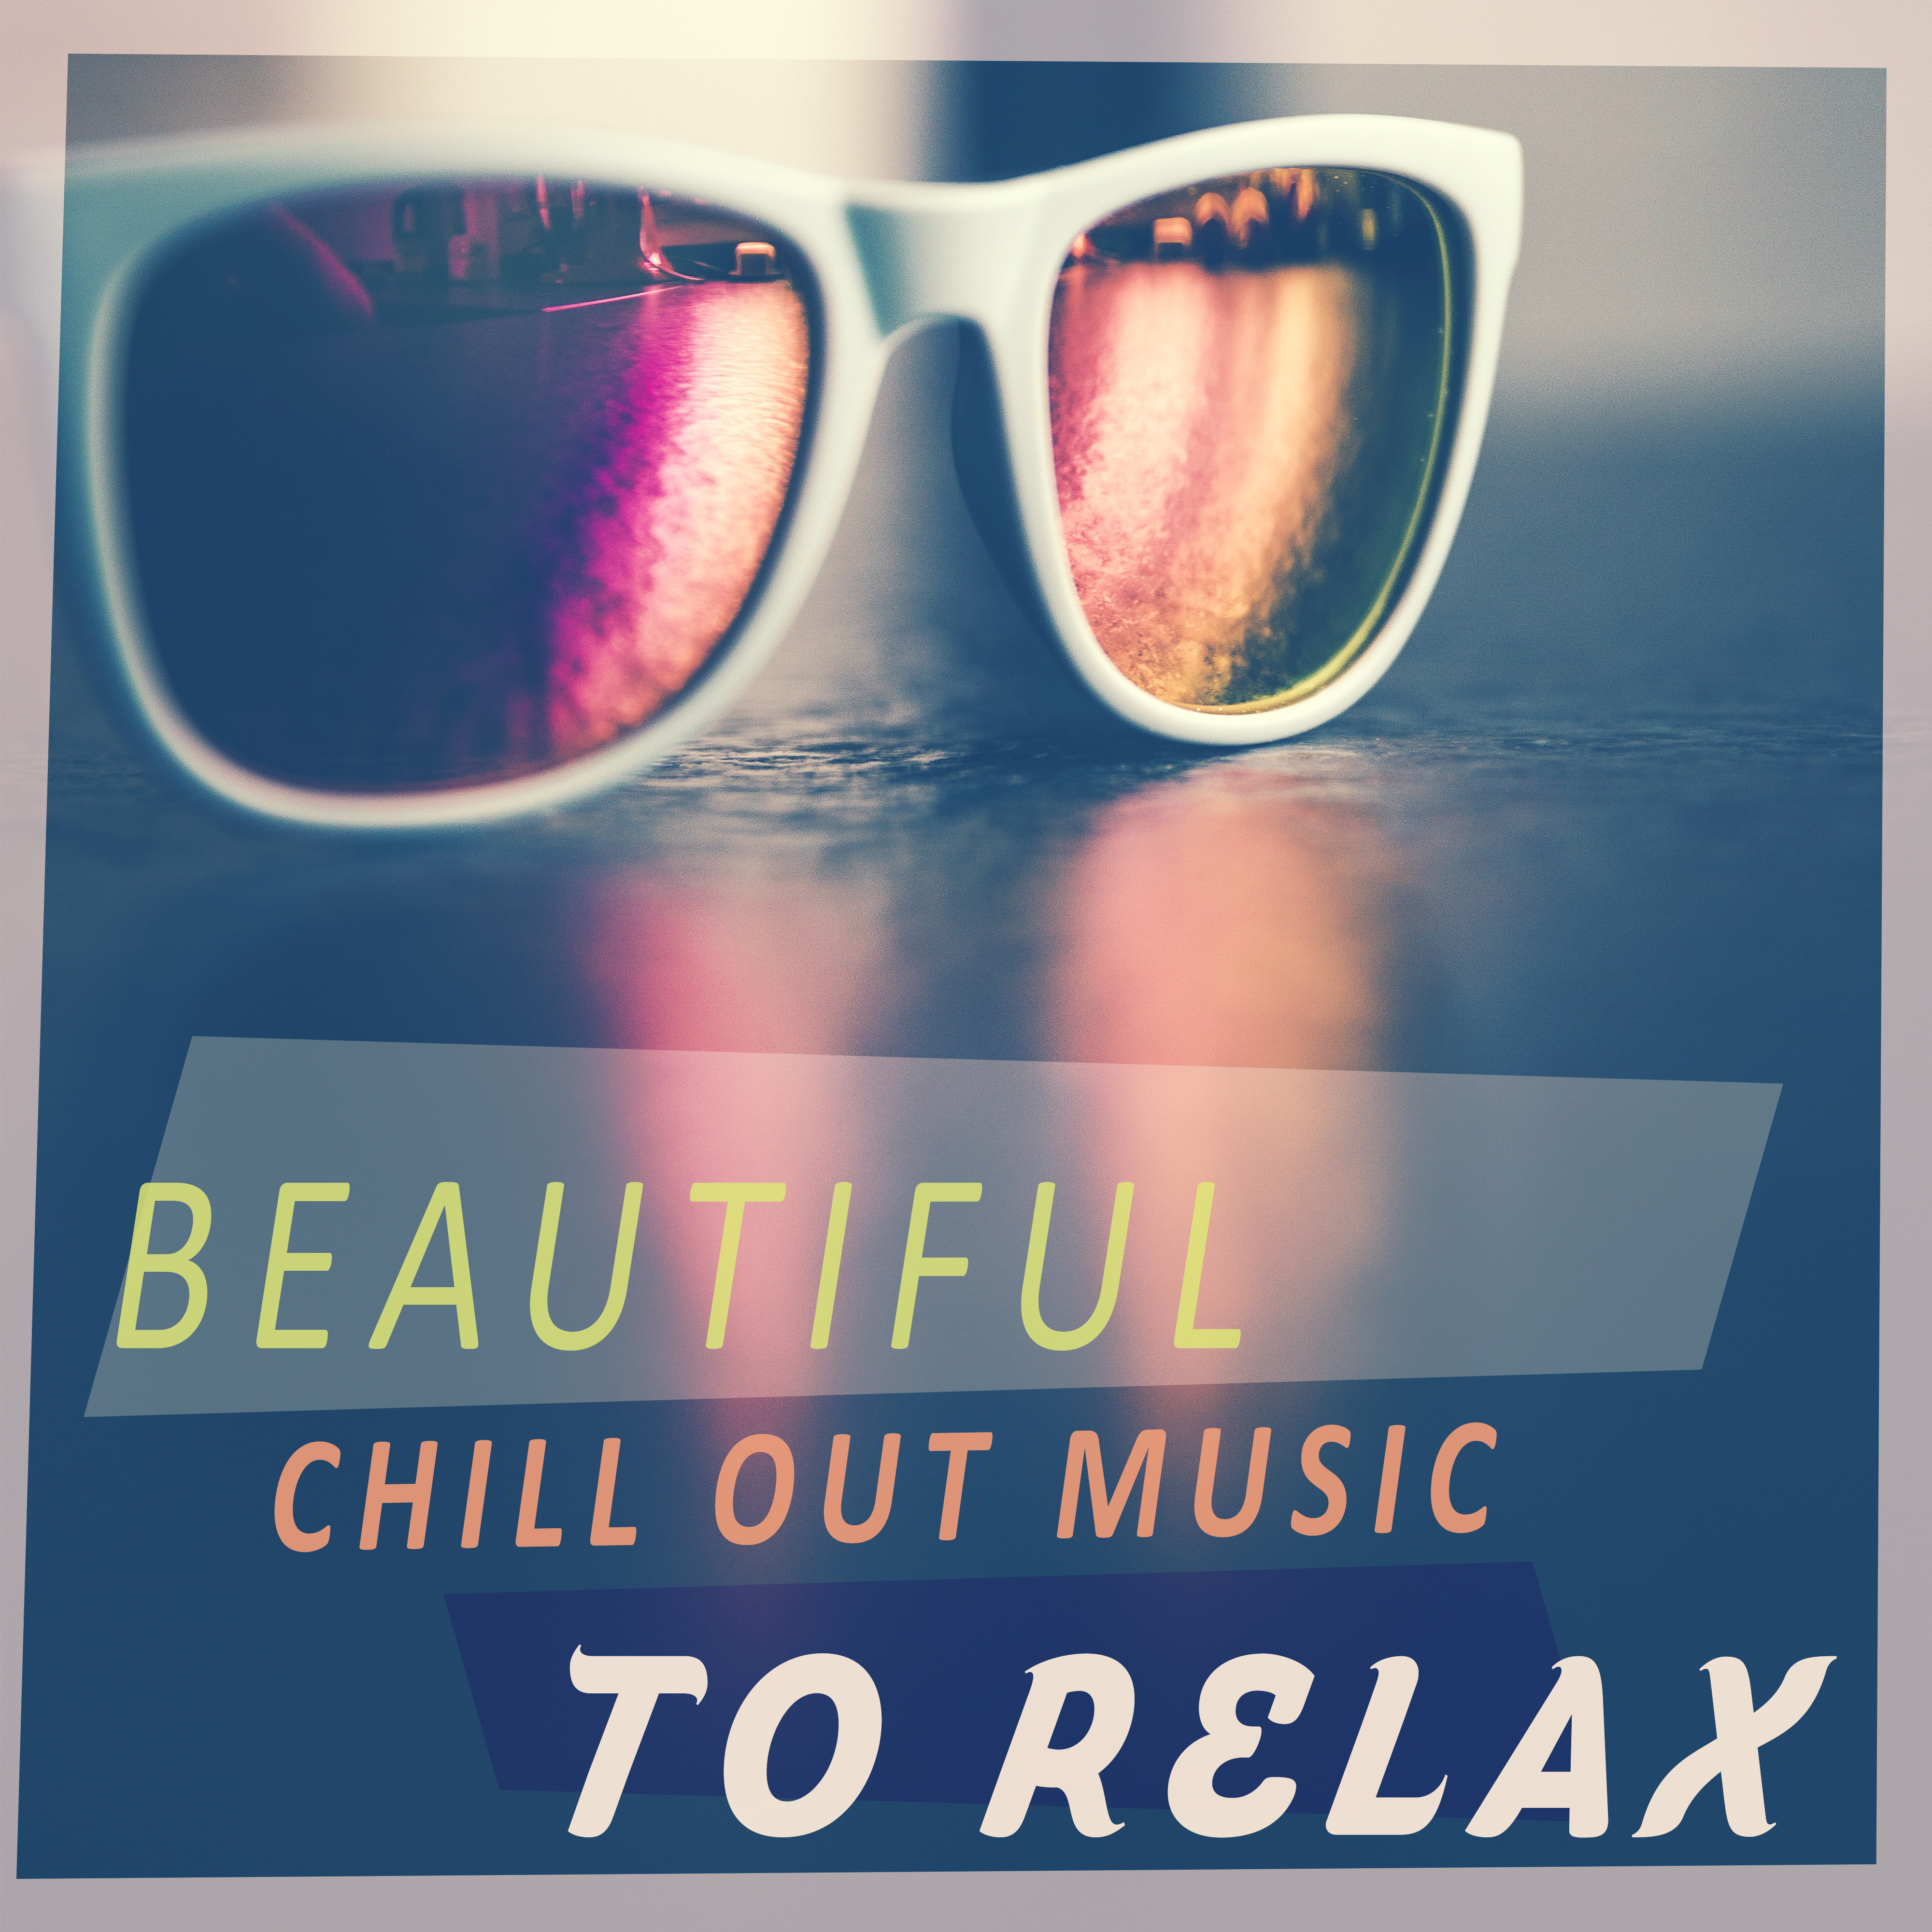 Beautiful Chill Out Music to Relax  Total Relaxation, Chillout Music, Relax Yourself, Calm  Peaceful Mind